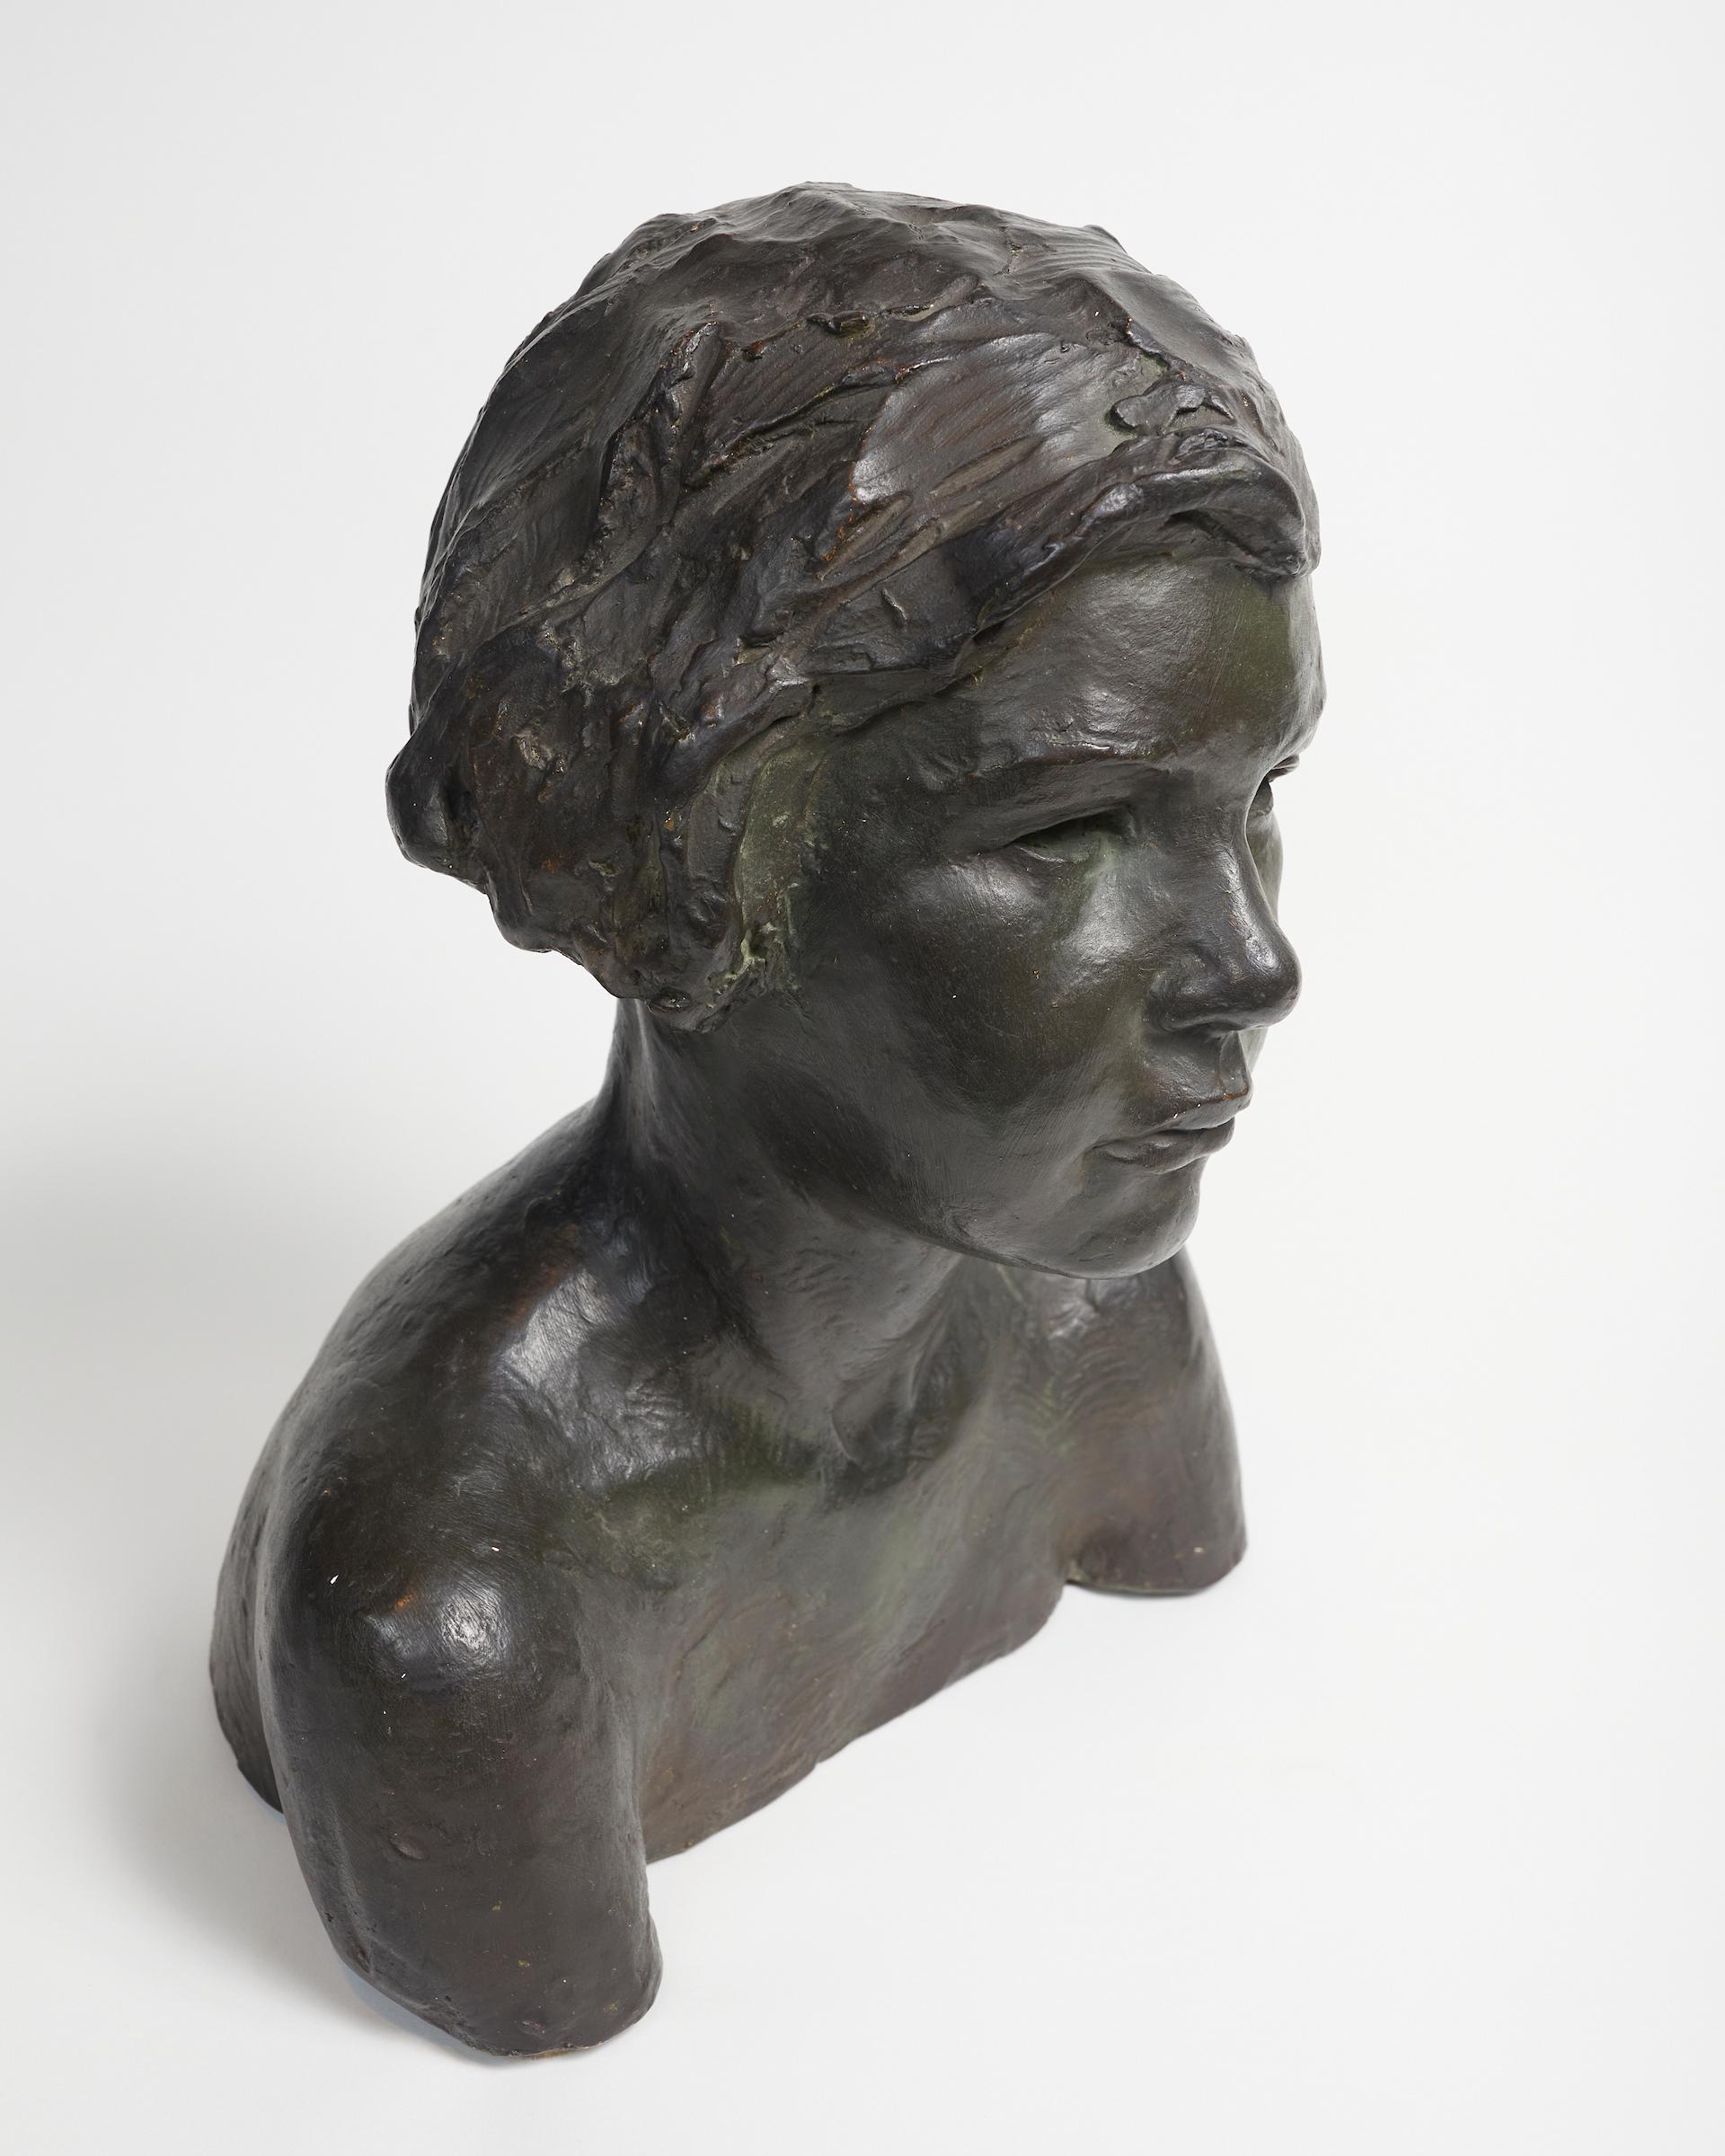 Patinated plaster bust of woman by Herbert McRae Miller representing Elizabeth O'toole. marked 1928 on paper and signed inside the sculpture 